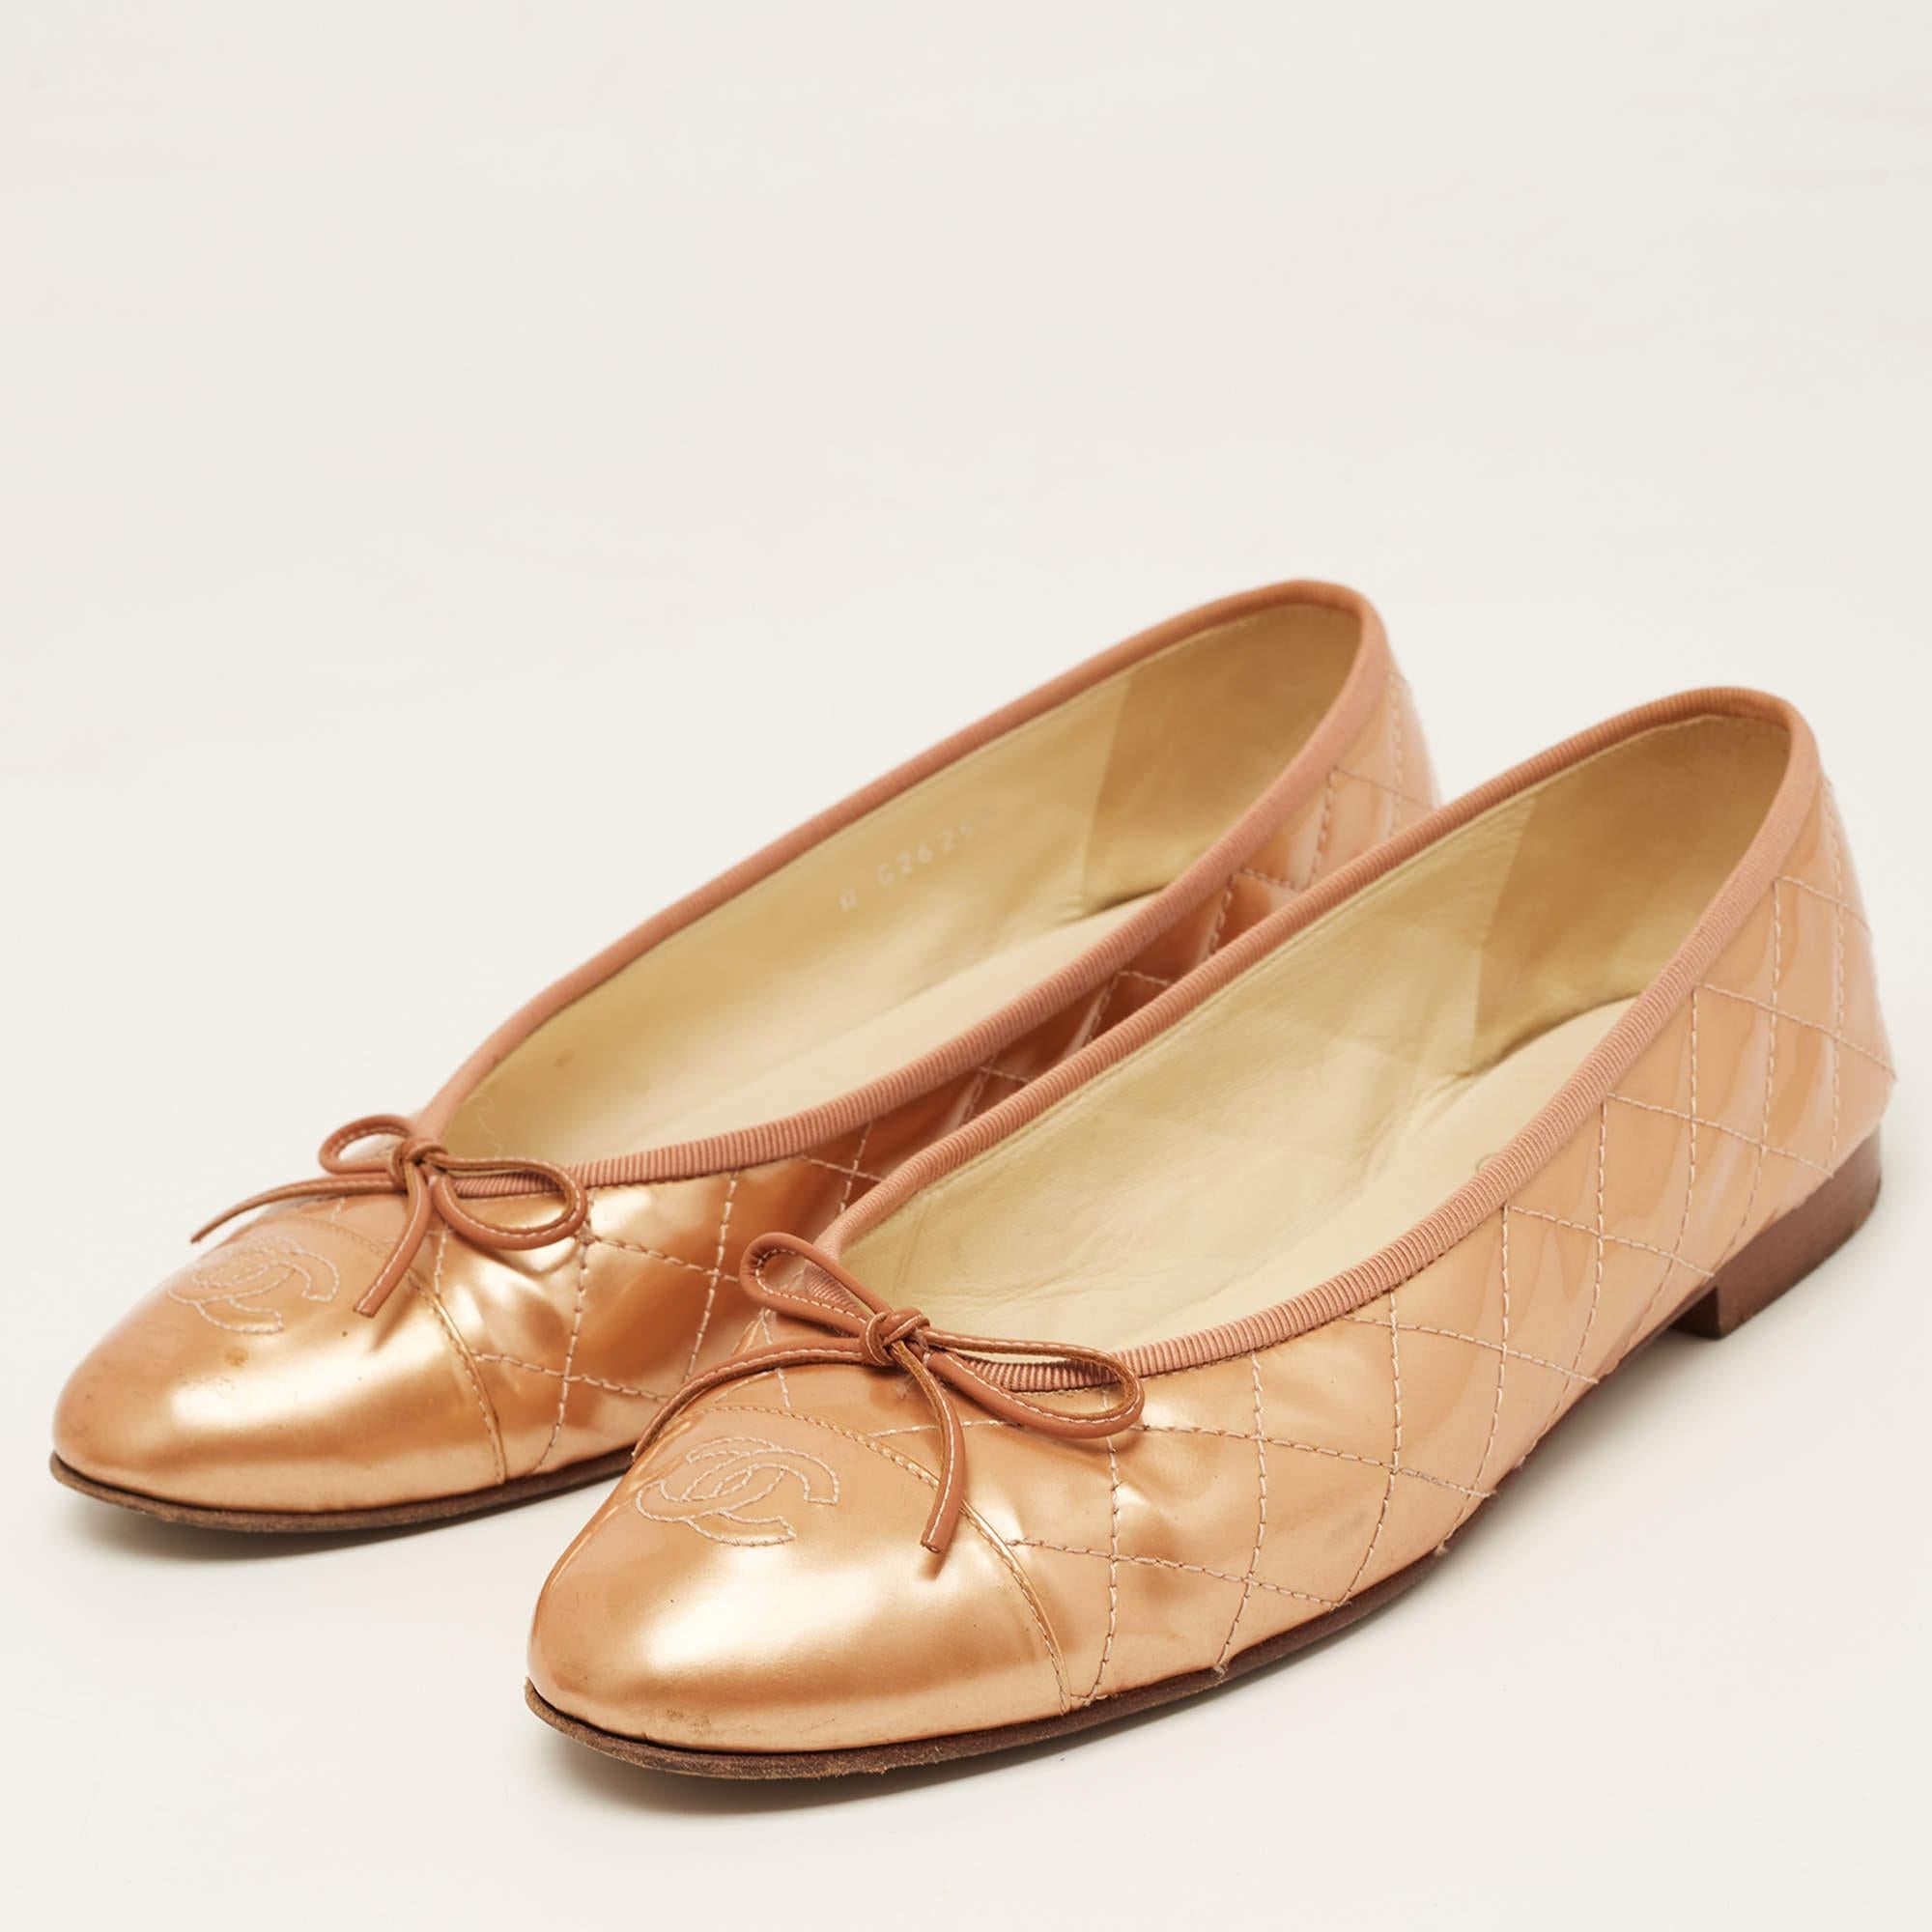 Complete your look by adding these Chanel ballet flats to your lovely wardrobe. They are crafted skilfully to grant the perfect fit and style.

